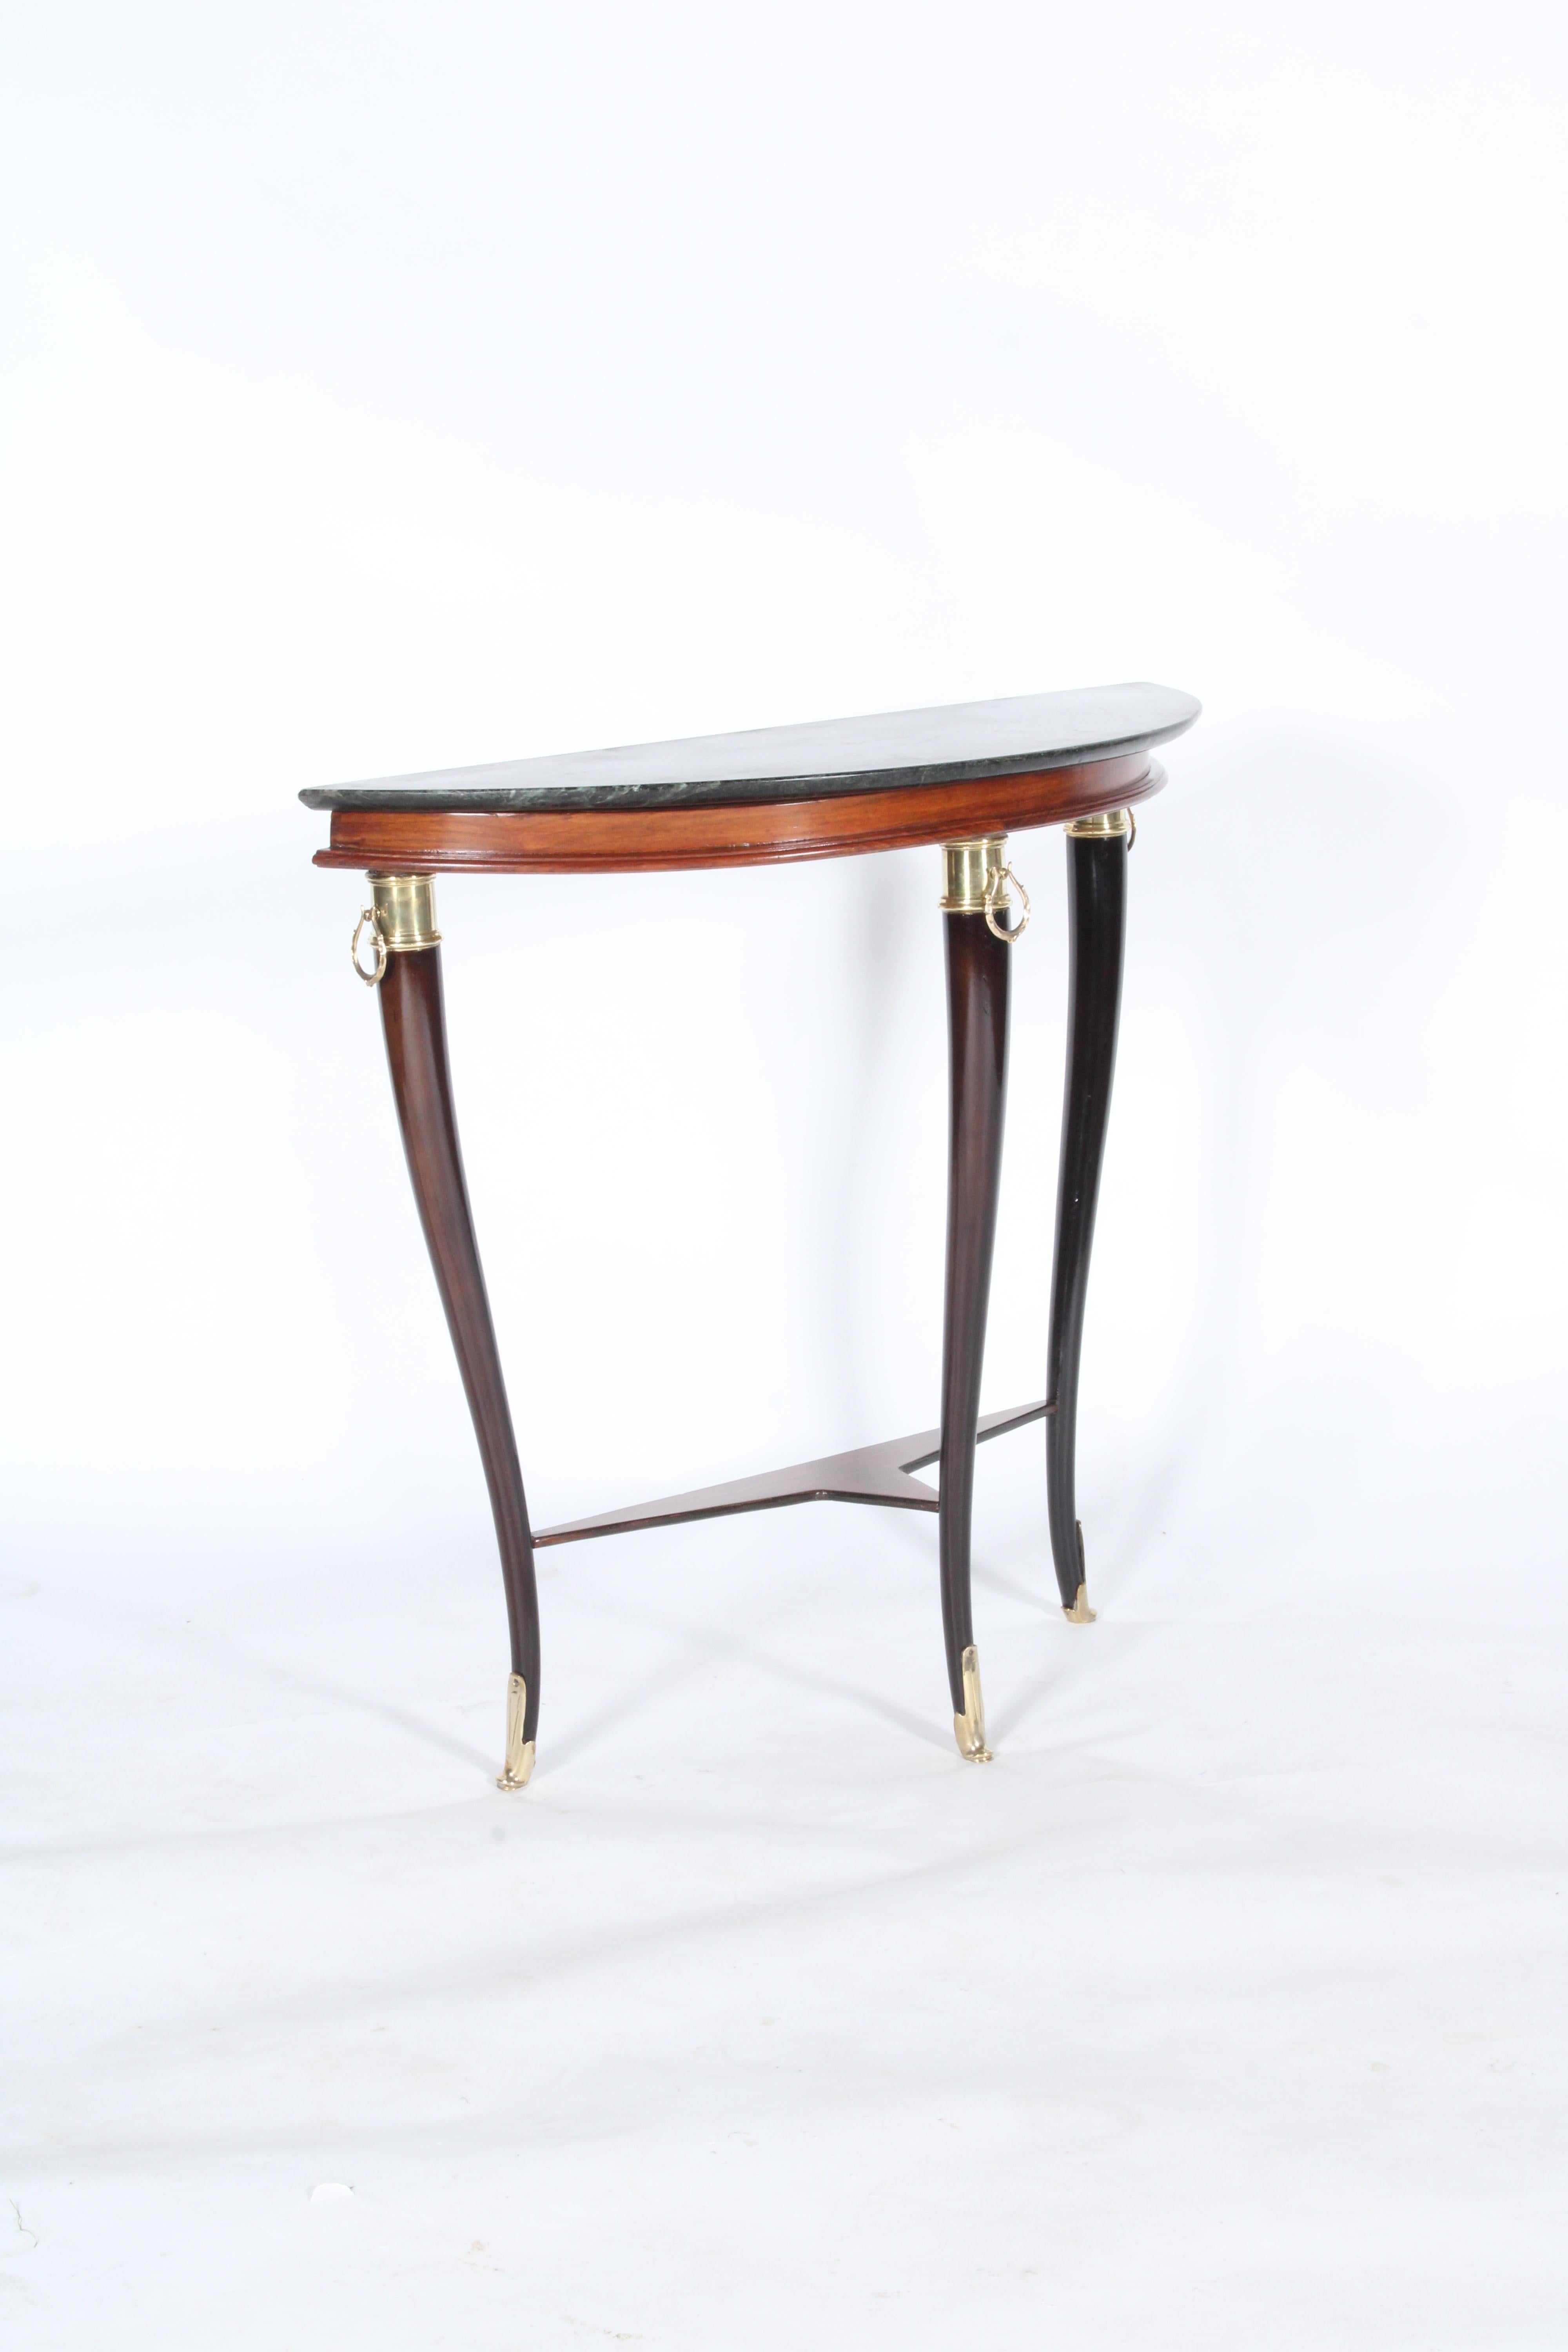 Italian Exquisite Demi Lune Console Table In The Manner Of Paola Buffa